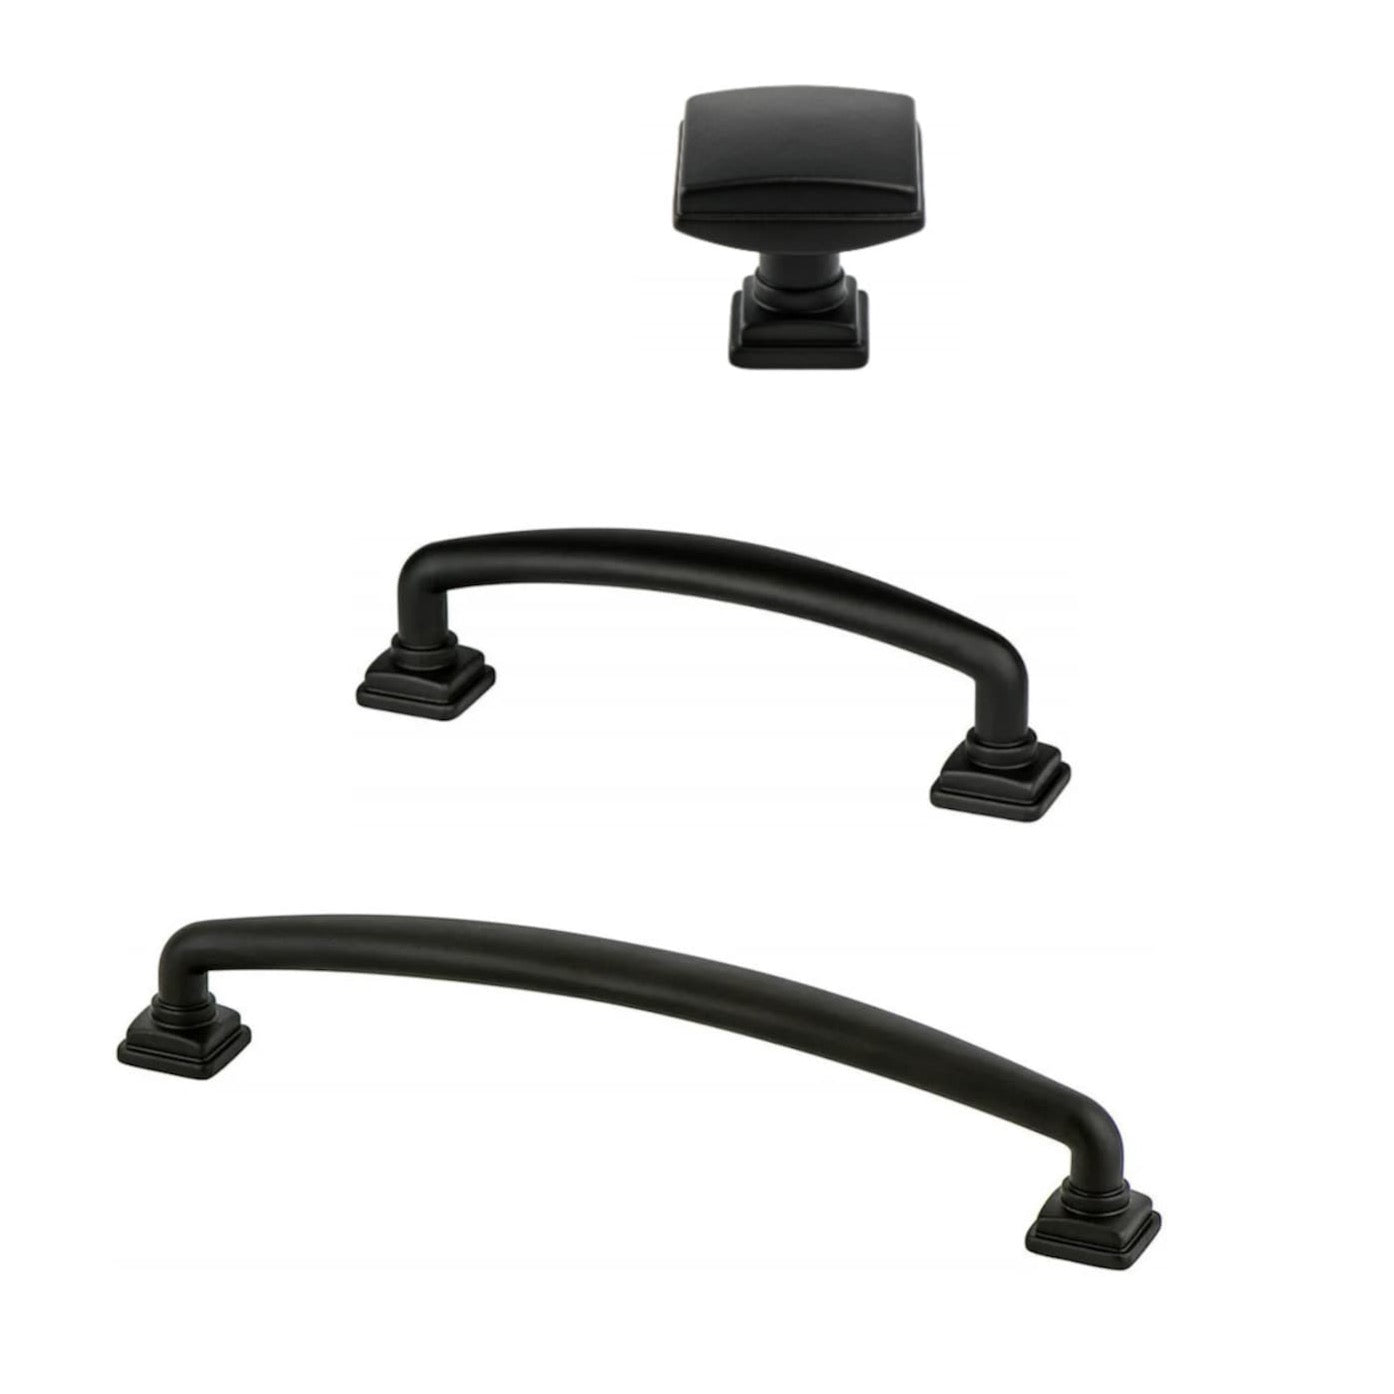 Kelly No.2 Cabinet Knobs and Drawer Pulls in Matte Black - Forge Hardware Studio